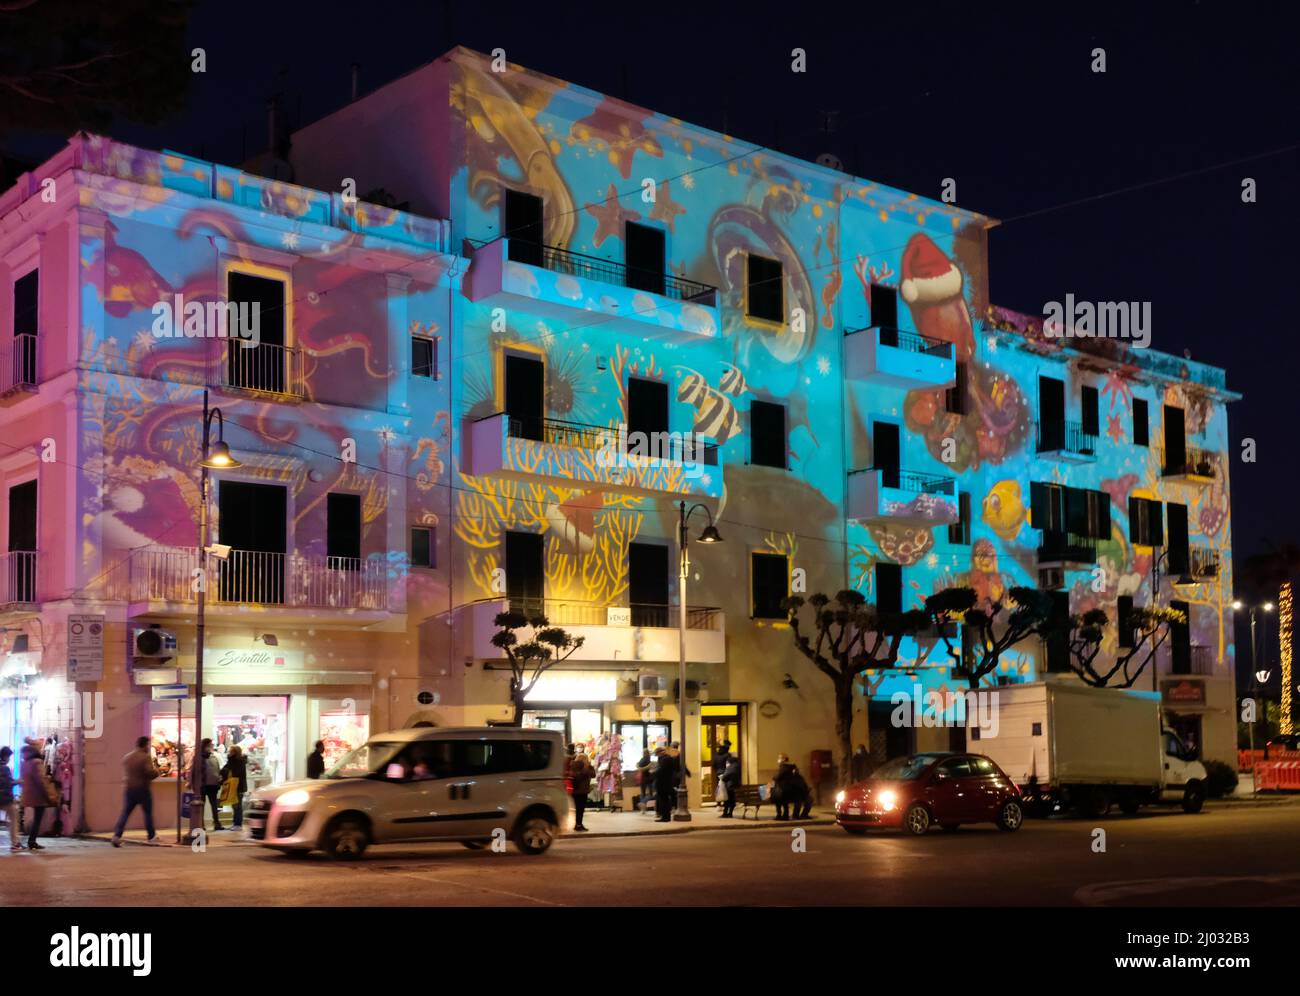 Facades decorated with light during the beautiful Christmas lights in Gaeta, December 2021, Italy. Stock Photo